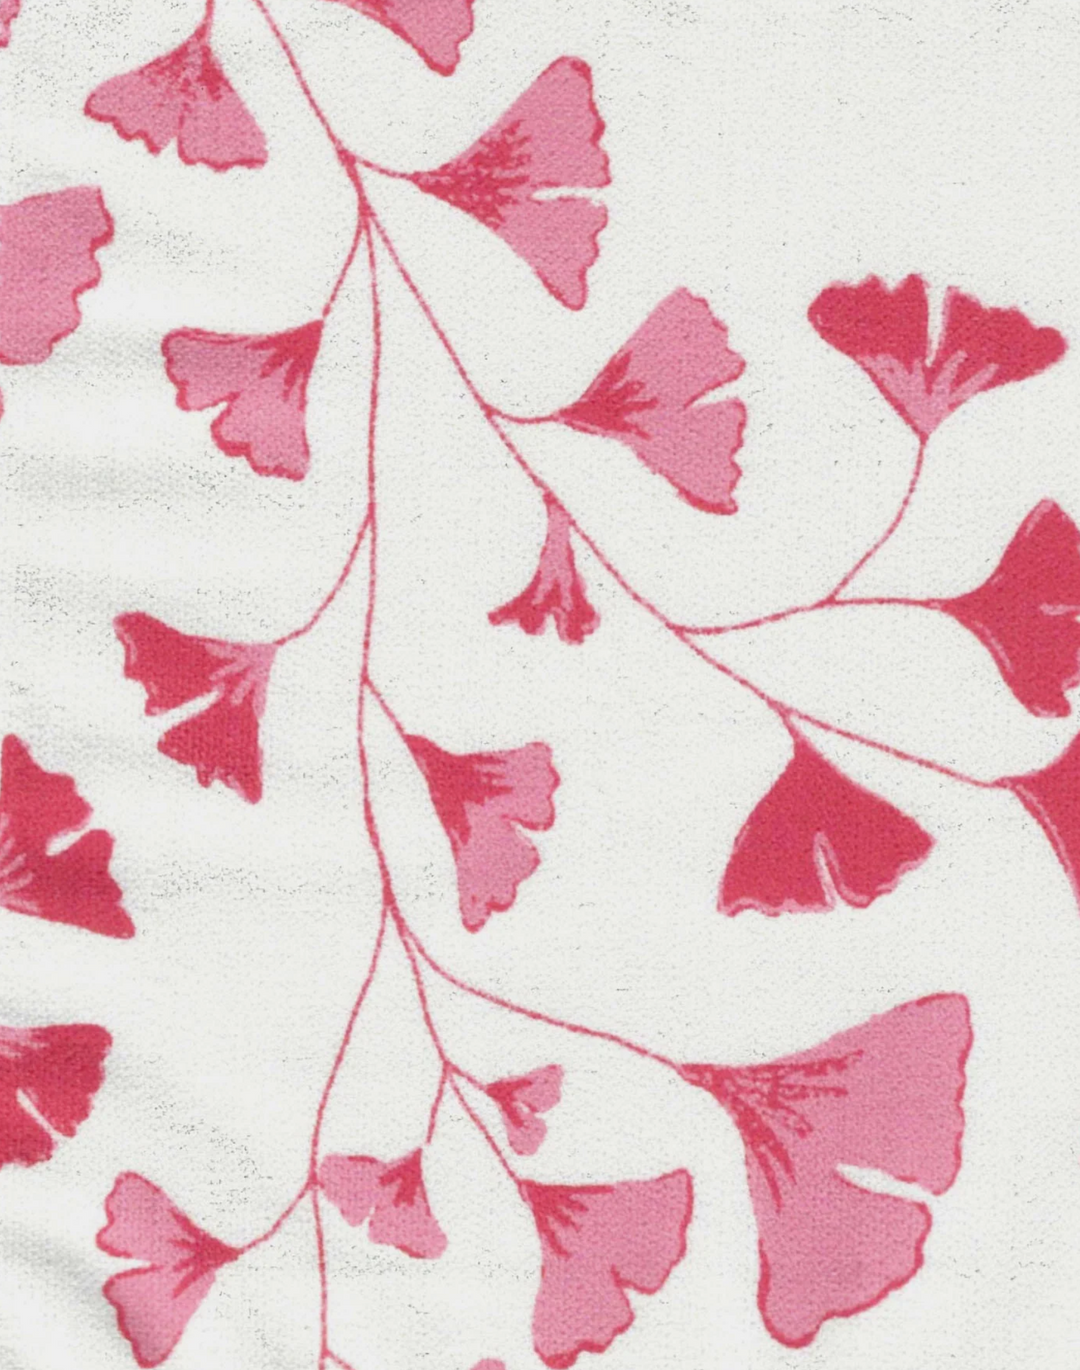 Ginkgo Leaves Fabric, Spinel Red